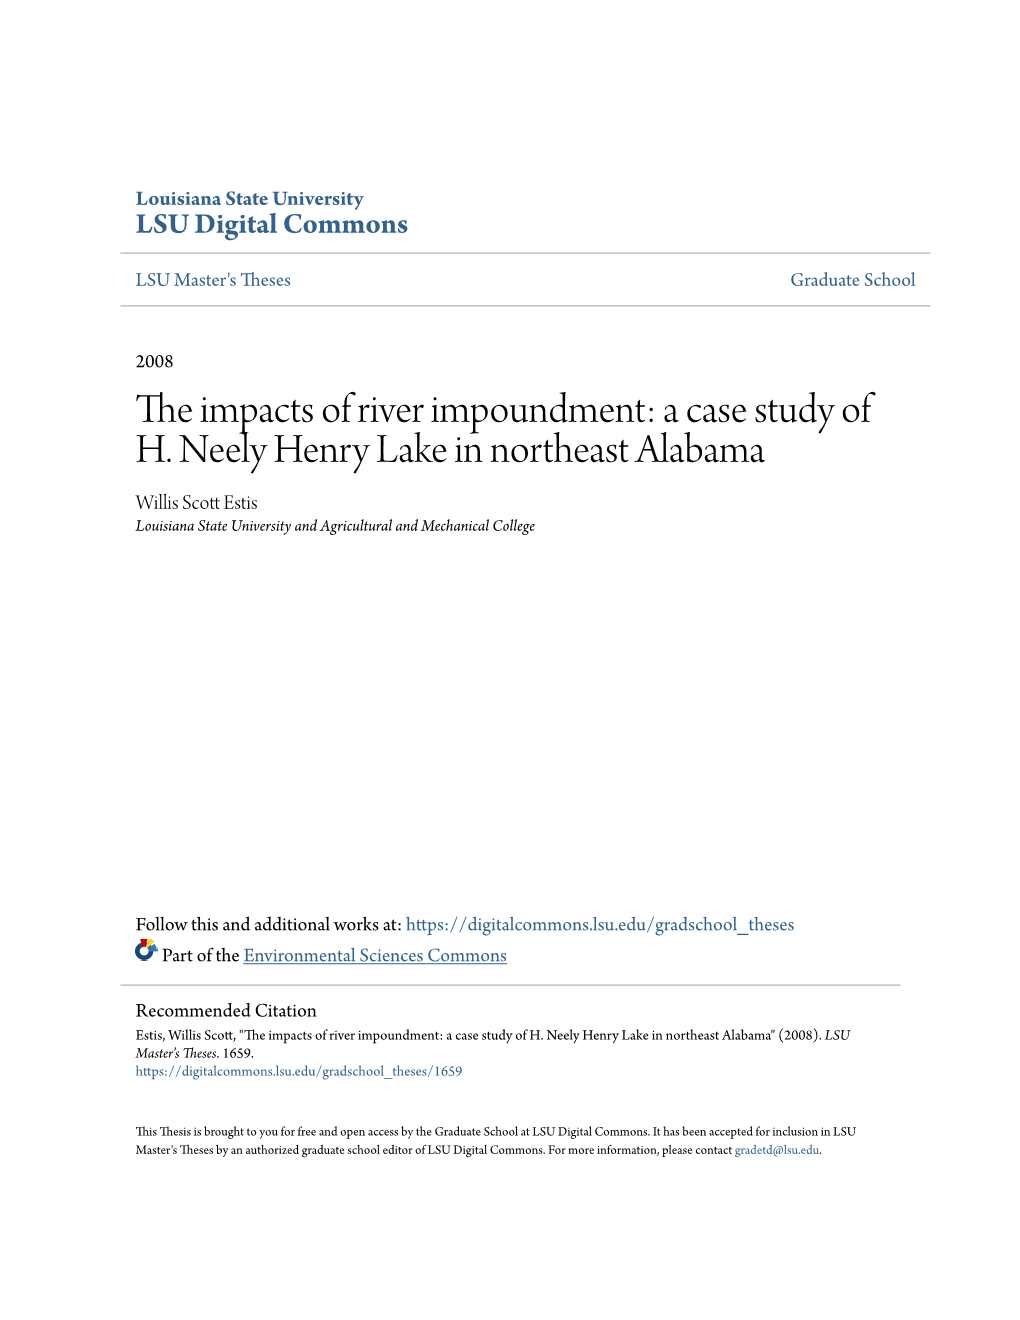 A Case Study of H. Neely Henry Lake in Northeast Alabama Willis Scott Estis Louisiana State University and Agricultural and Mechanical College